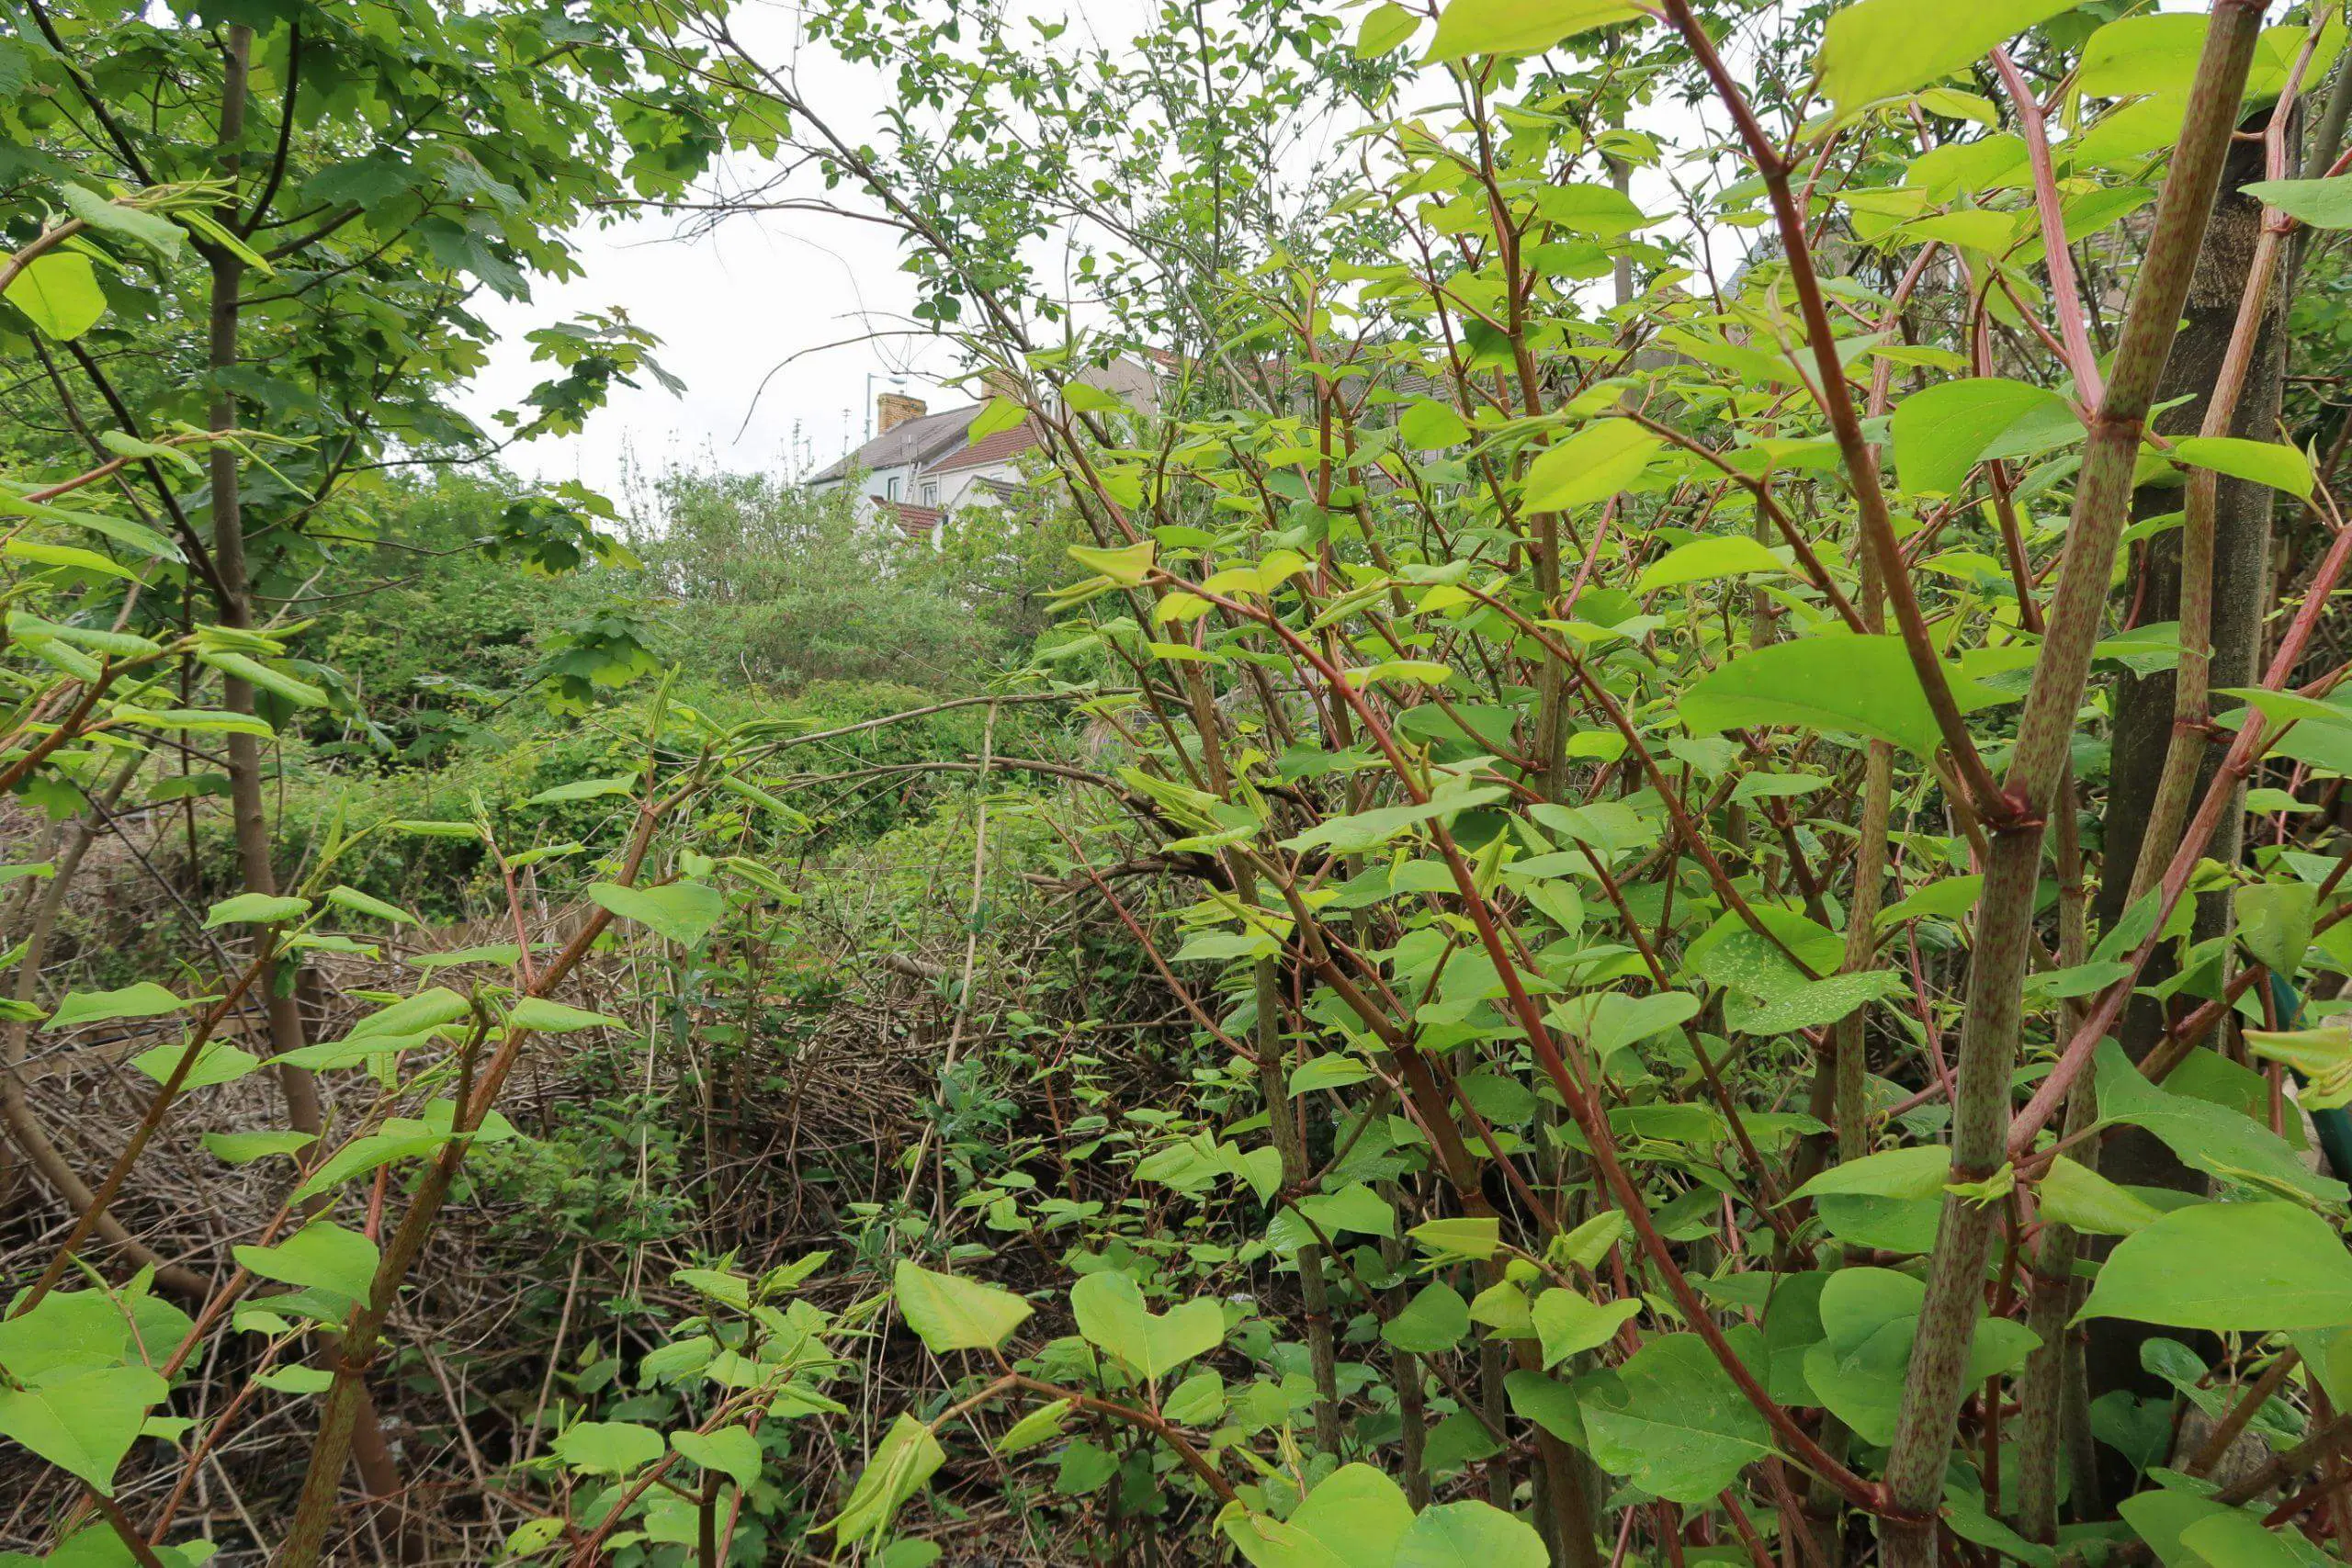 Japanese knotweed easily grows in a neglected garden and consumes it within one season